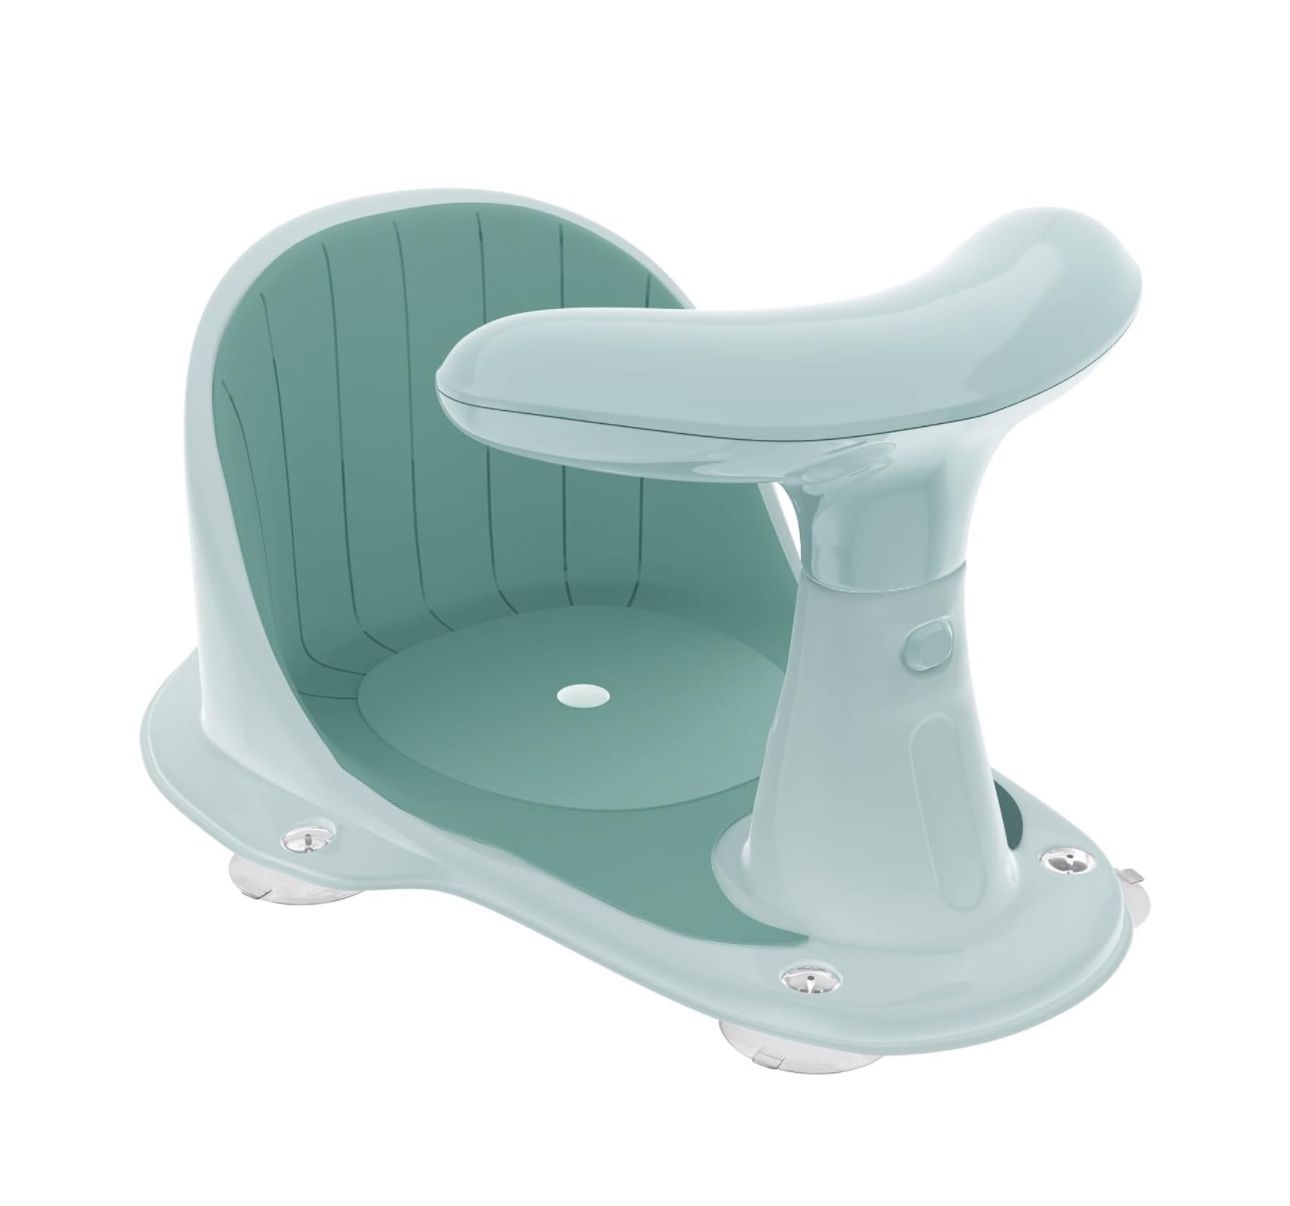 Baby Bath Seat for Babies 6 Months & Up - Infant Bathtub Seats with Thermometer for Sitting up in The tub - Toddler Baby Shower Chair - Bath Tub Seate